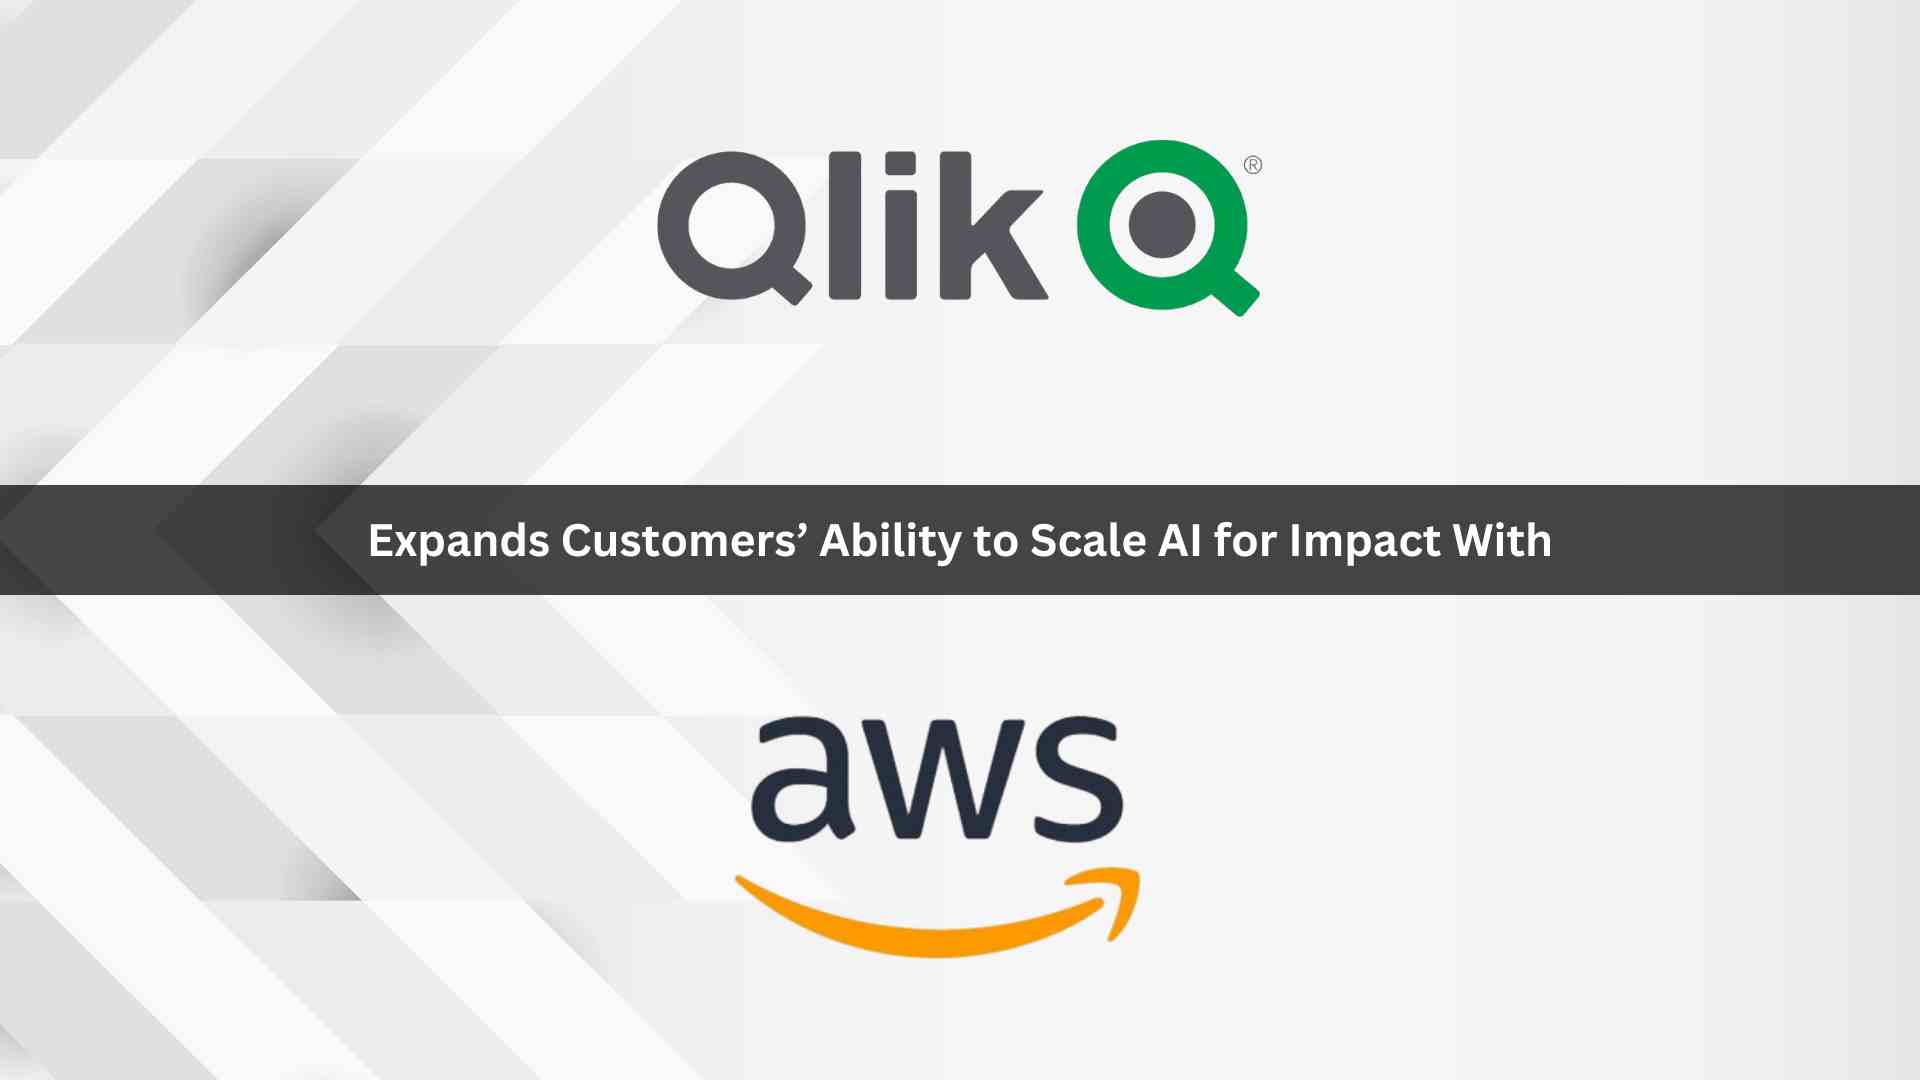 Qlik Expands Customers’ Ability to Scale AI for Impact with AWS